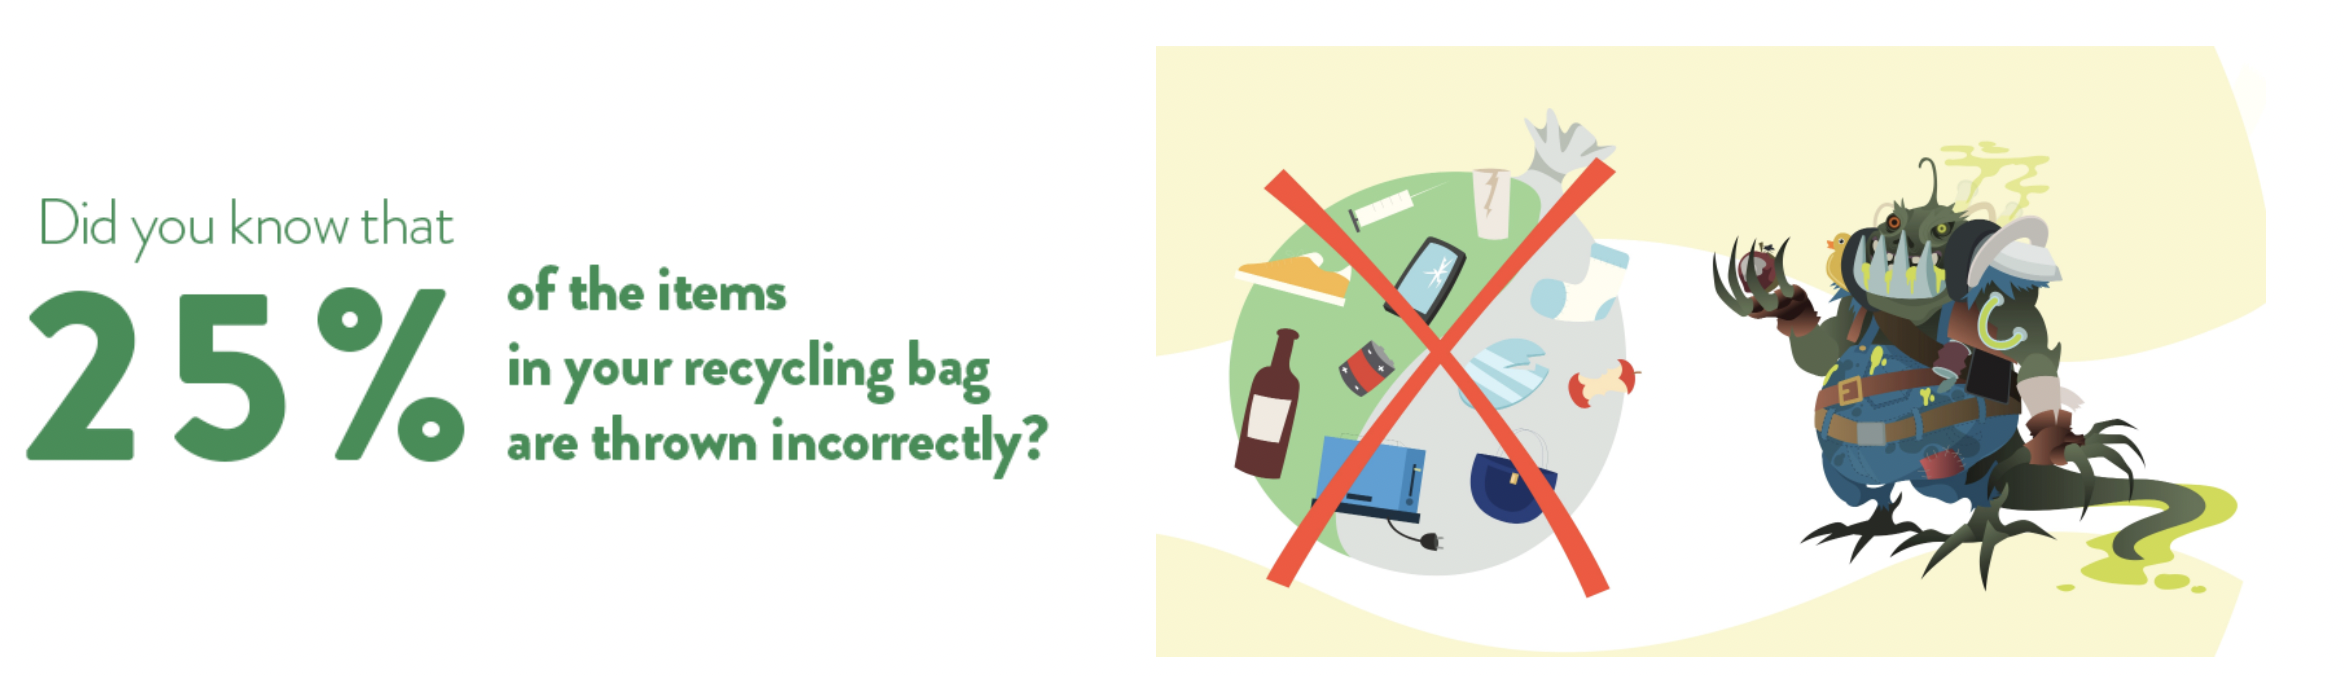 25% of the items in the recycling bag are items that should not have been thrown in this bag